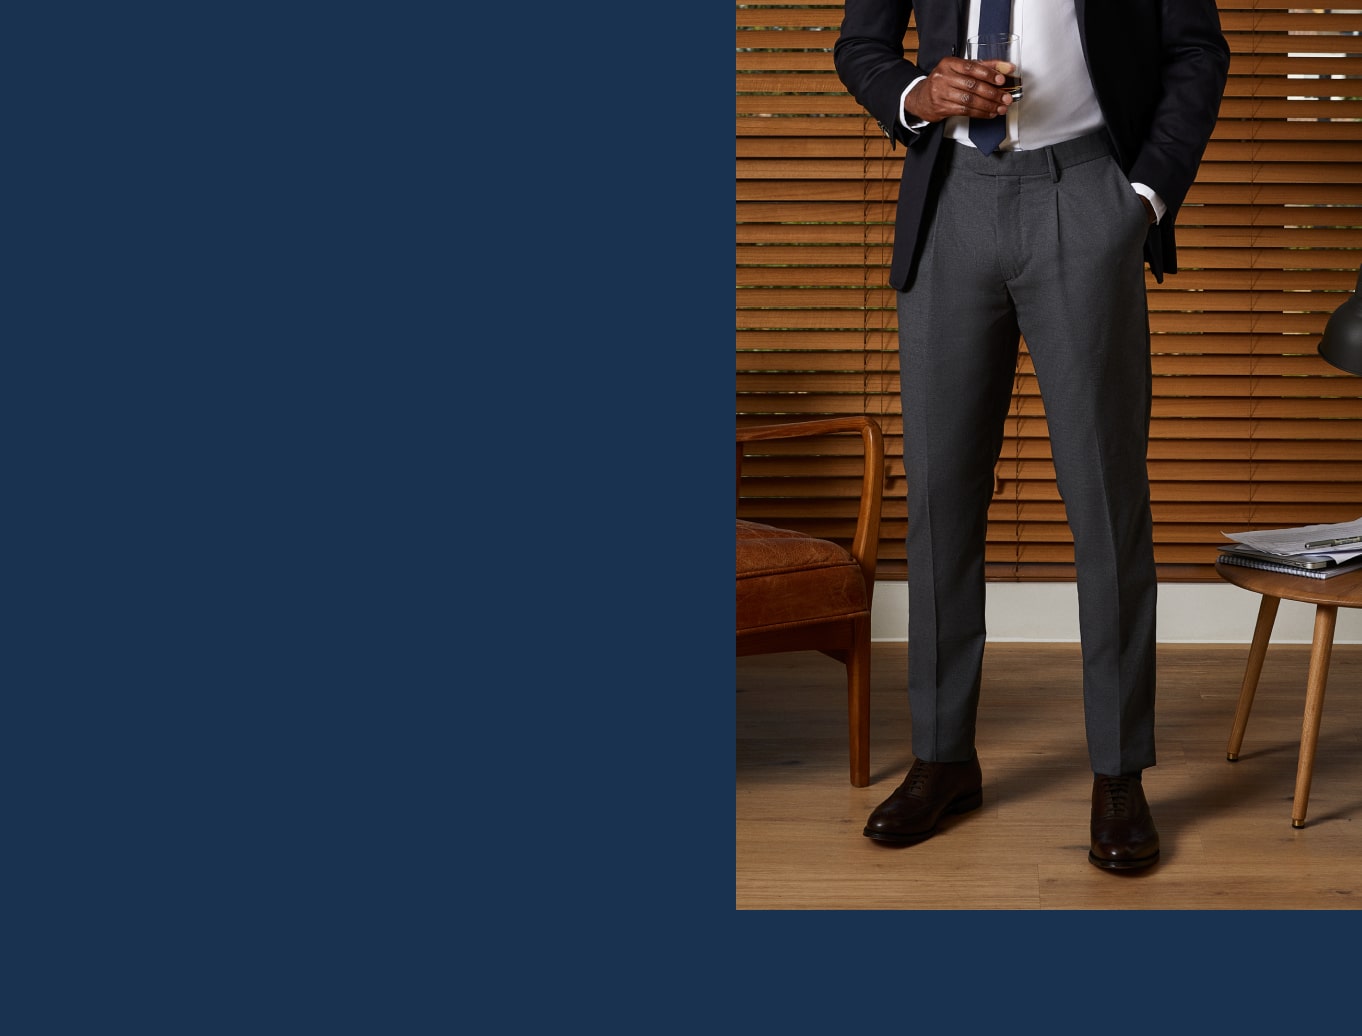 How to Wear Black Pants and Brown Shoes - Suits Expert